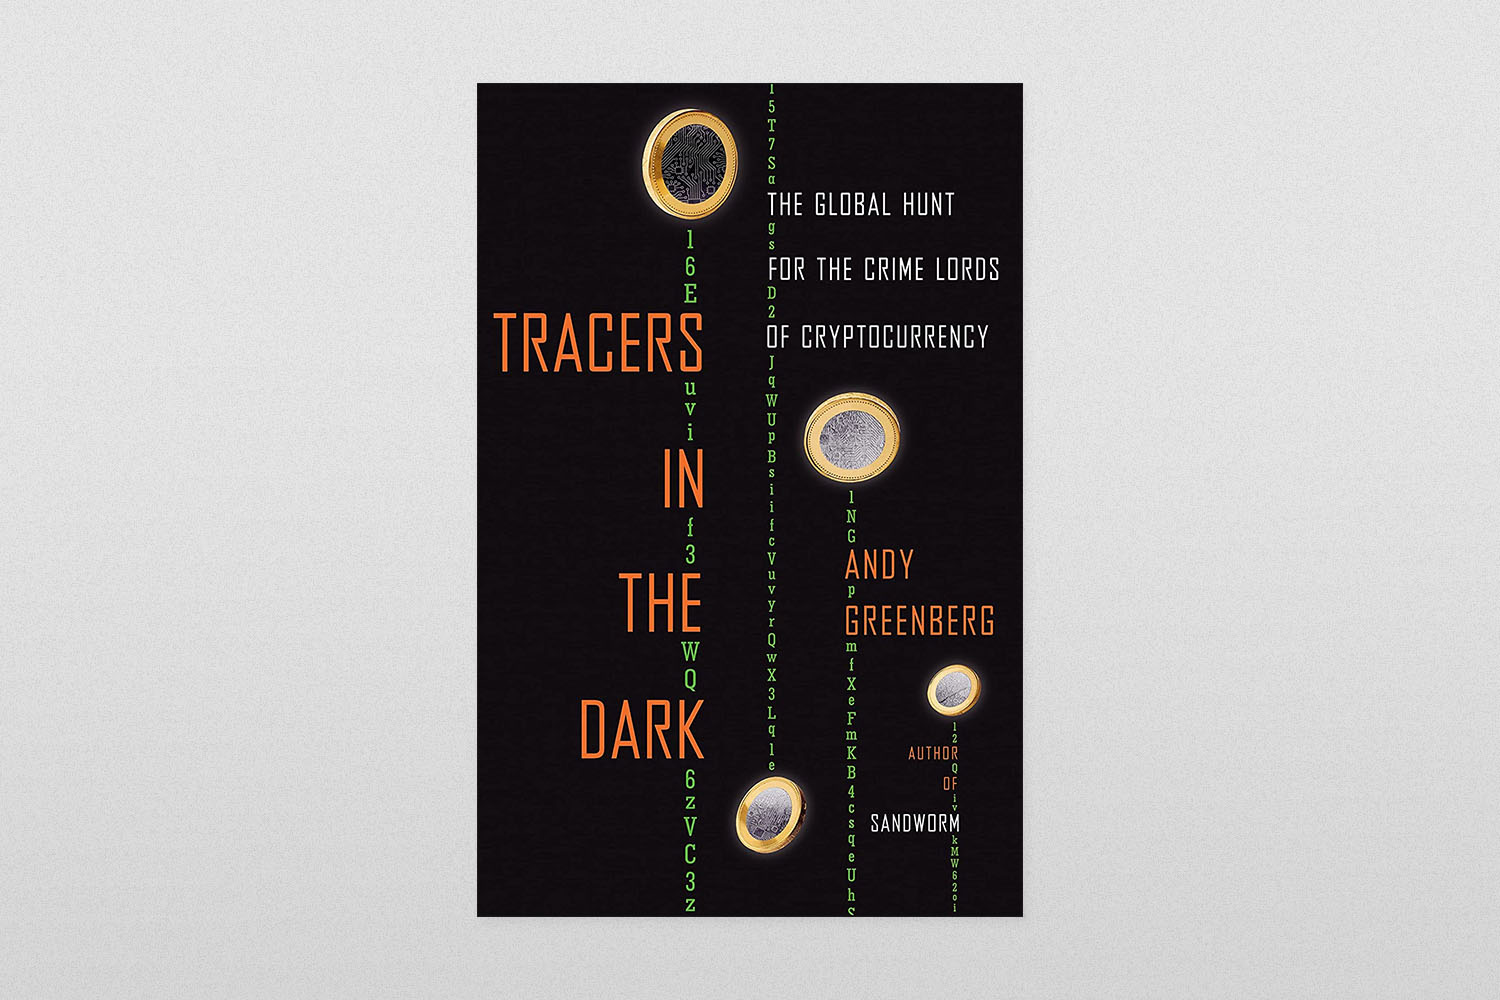 Tracers in the Dark- The Global Hunt for the Crime Lords of Cryptocurrency